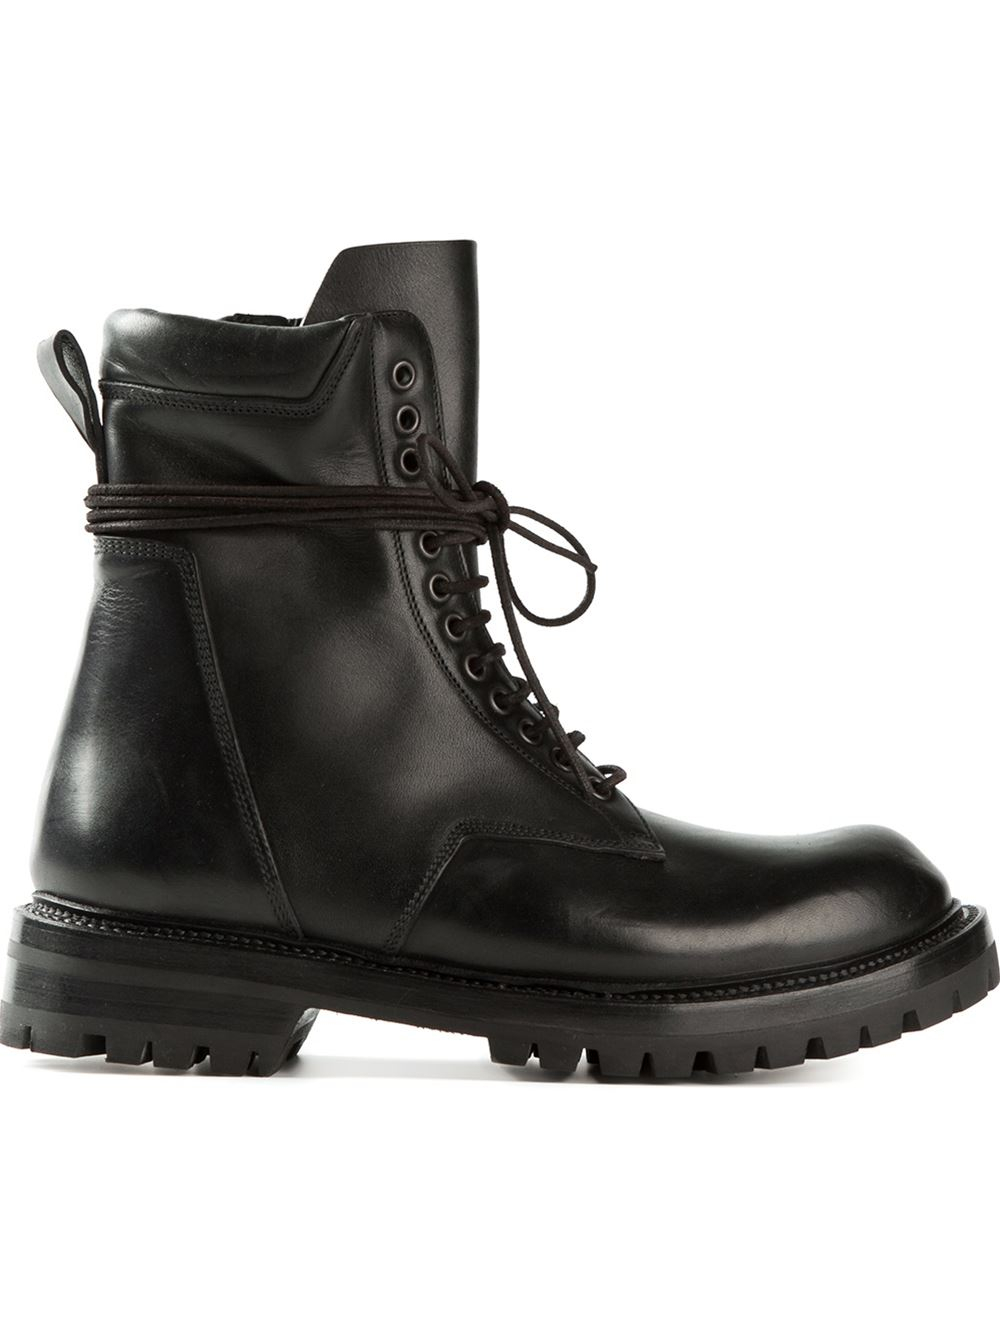 Rick Owens Army Boots - Army Military